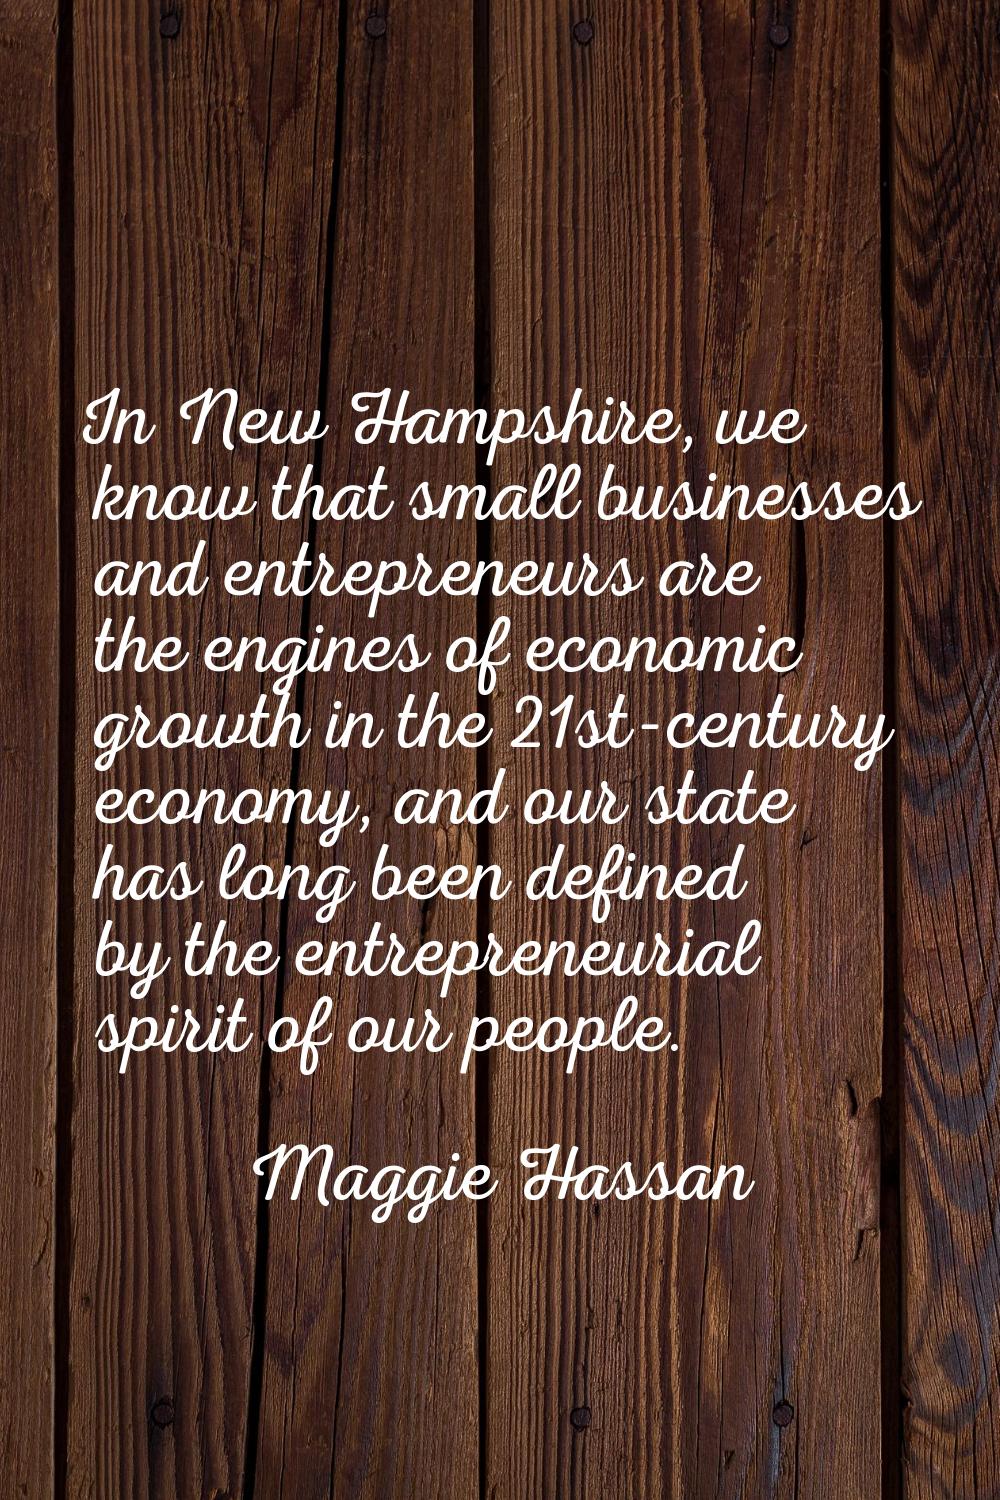 In New Hampshire, we know that small businesses and entrepreneurs are the engines of economic growt